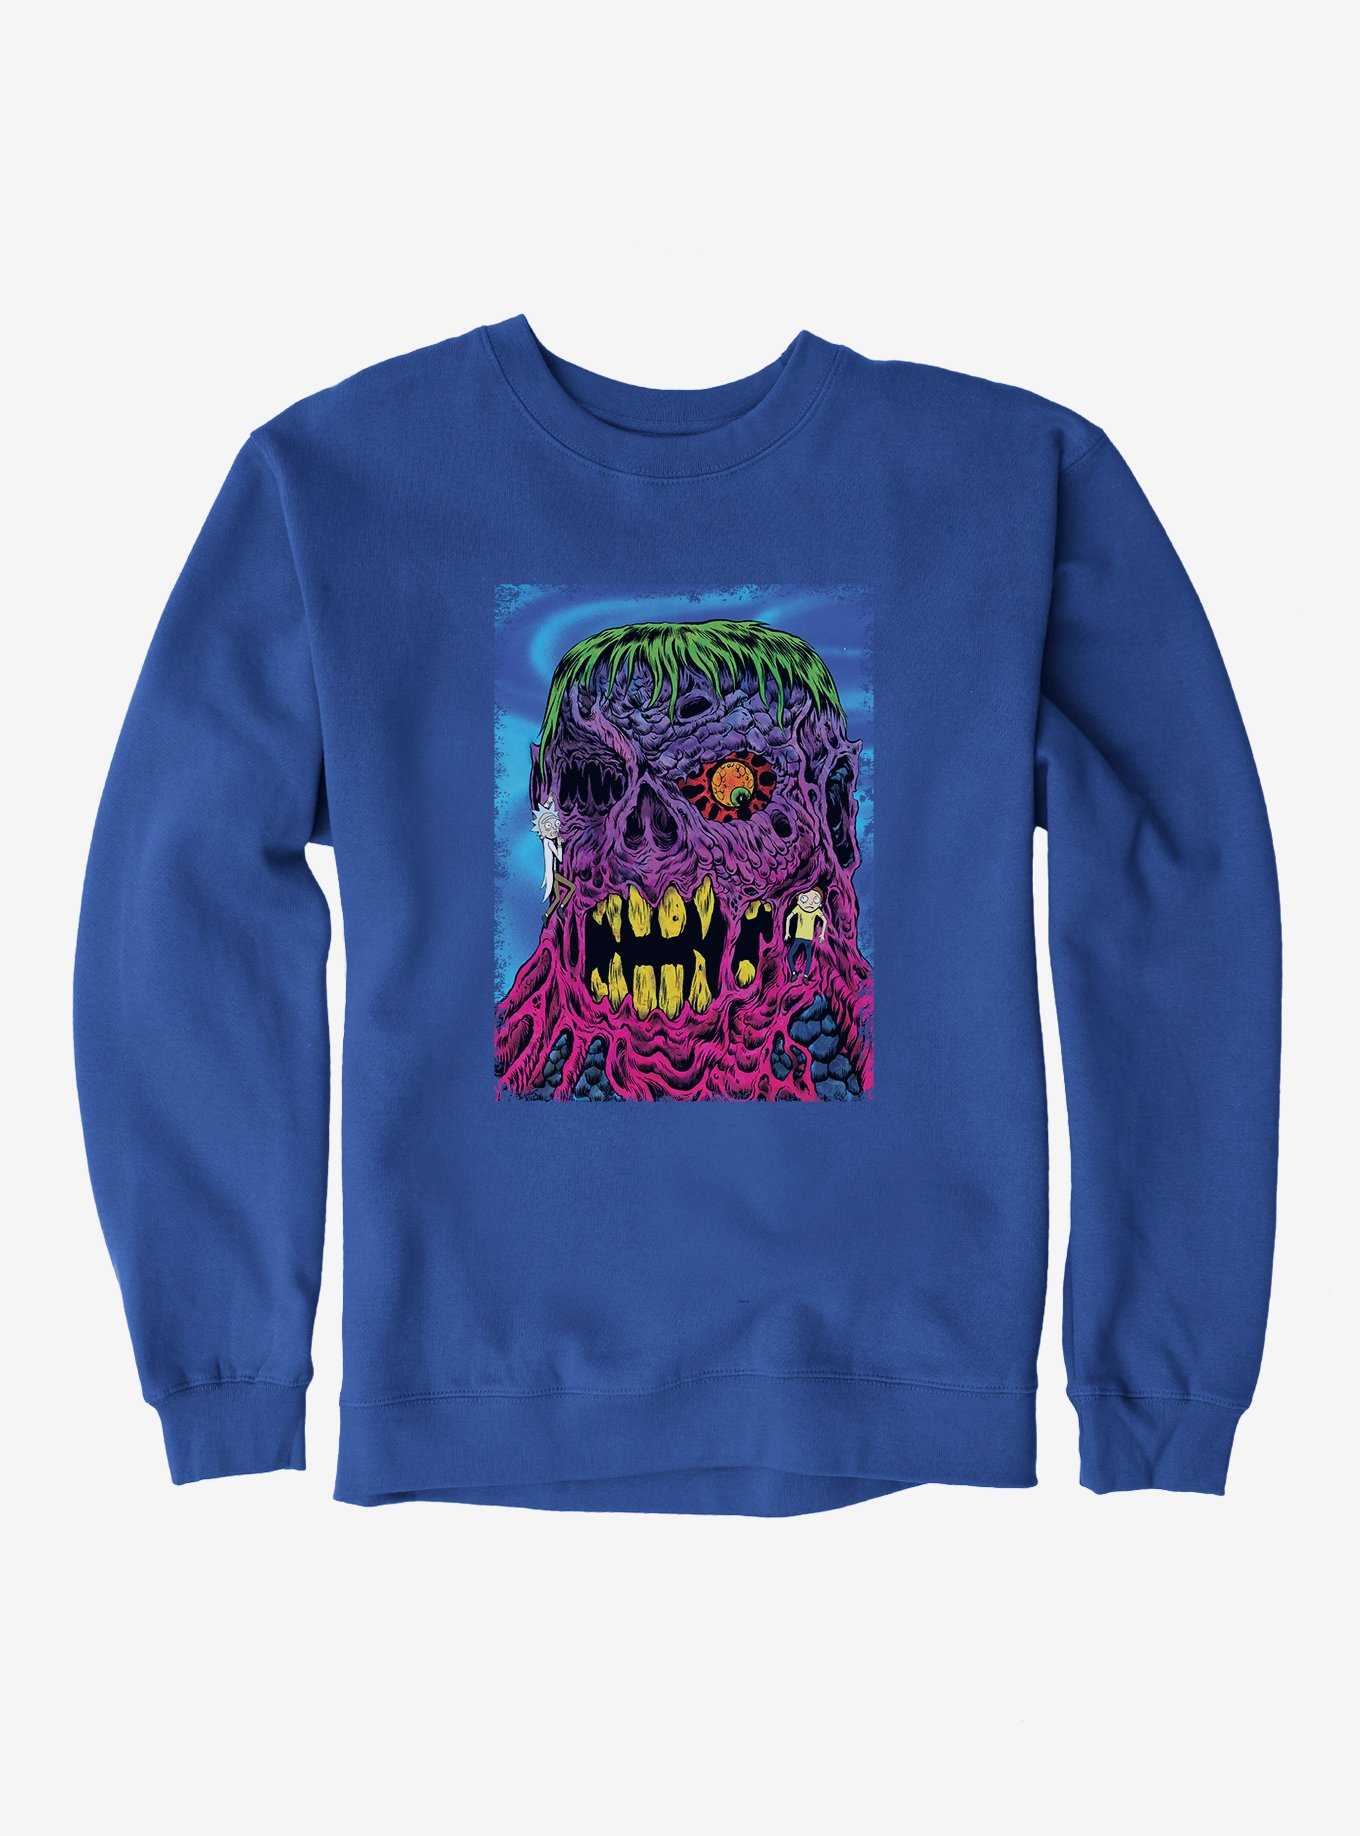 Rick And Morty One Eyed Monster Sweatshirt, , hi-res